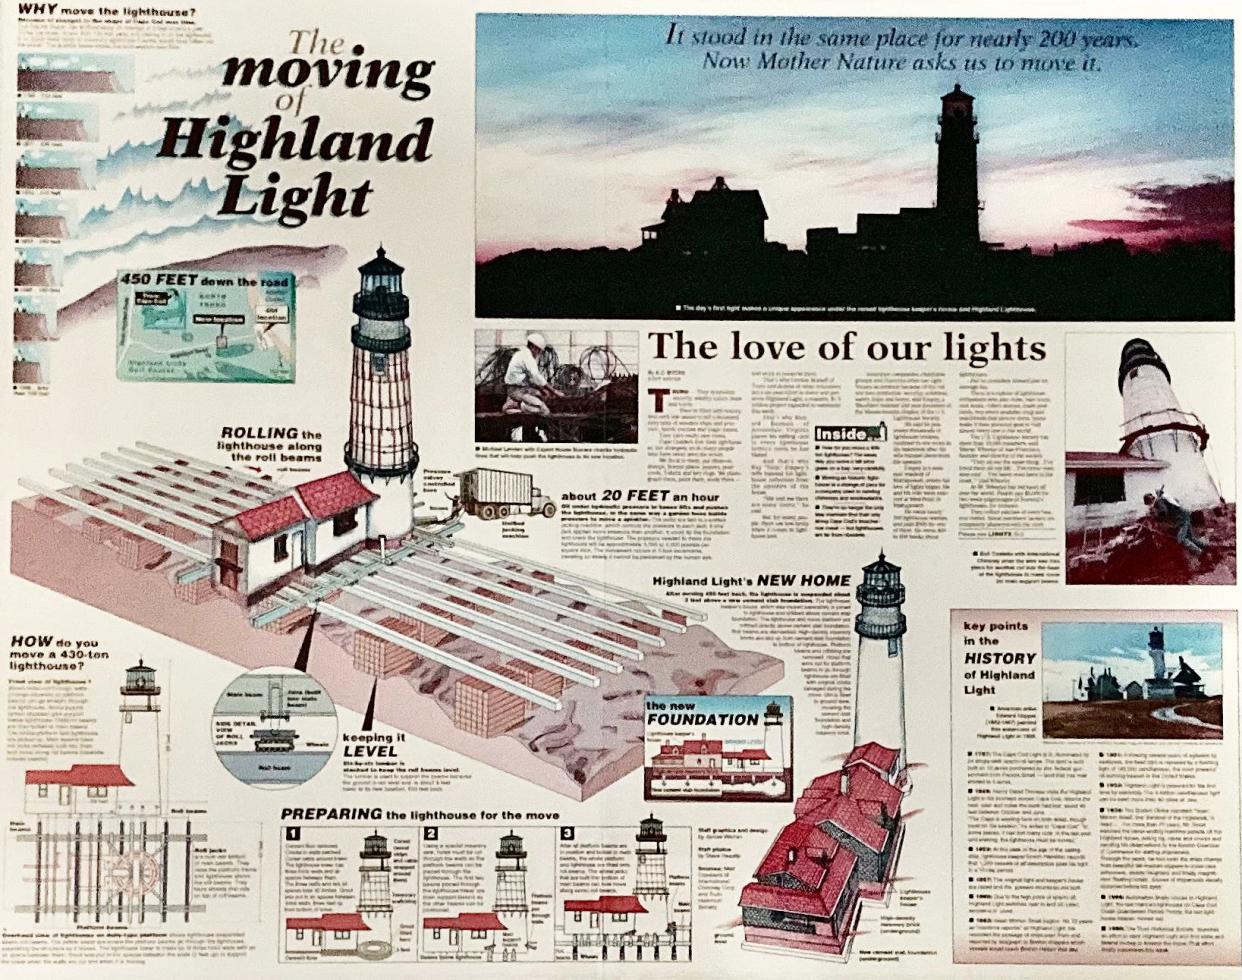 A graphic from the July 14, 1996 edition of the Cape Cod Times shows how Highland Light was moved.